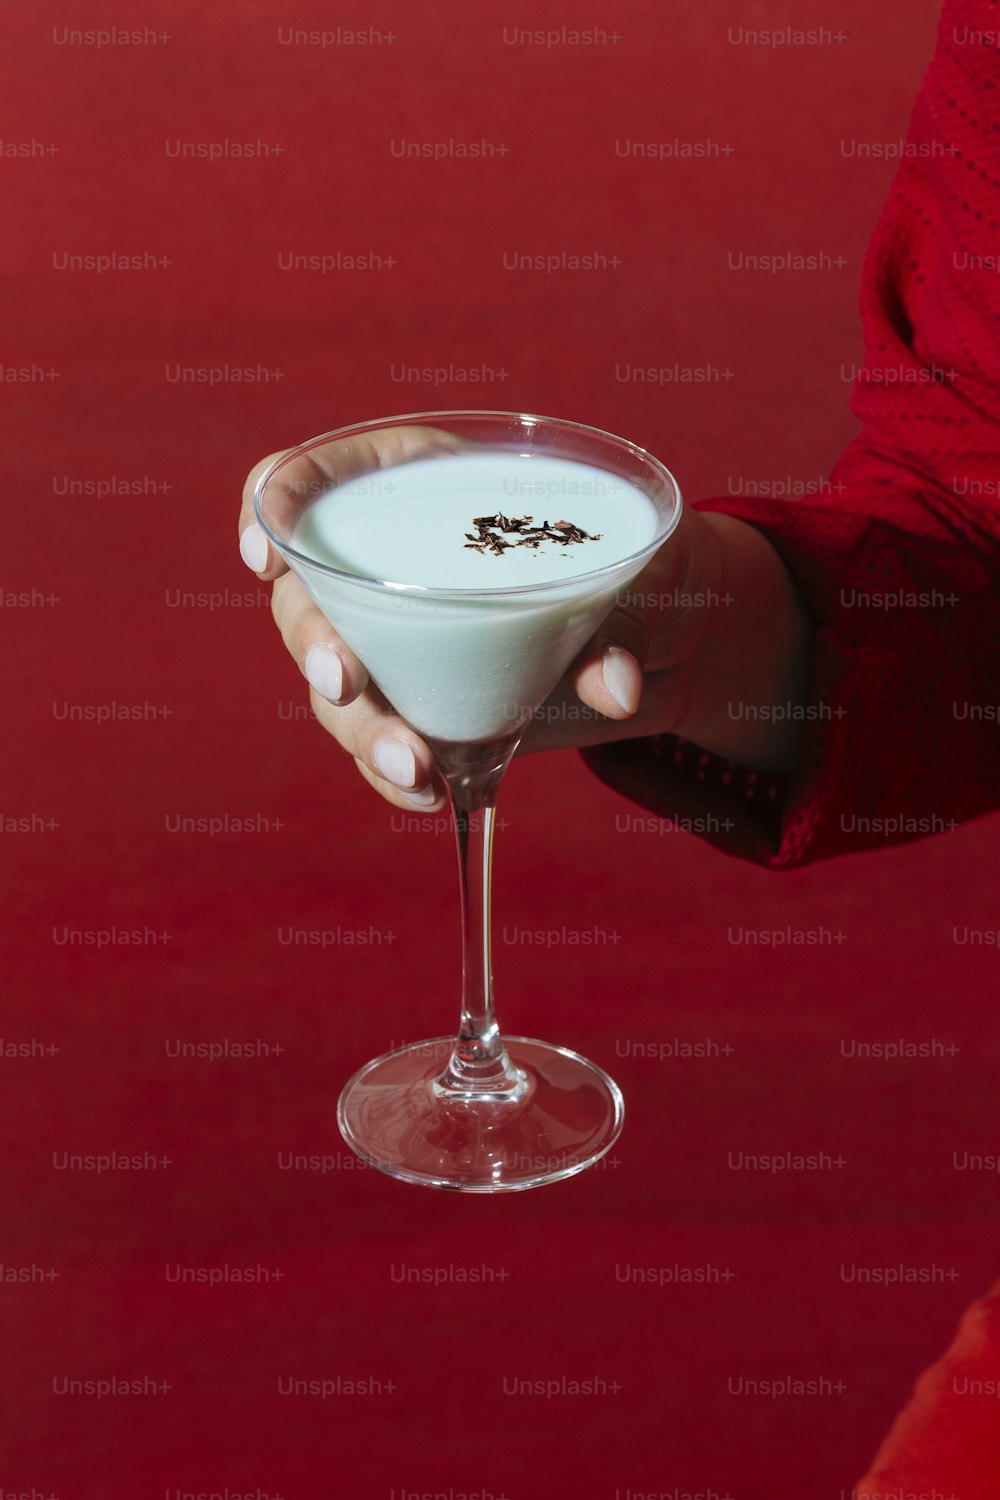 Grasshopper cocktail, an old classic from New Orleans, with green creme de menthe. white creme de cacao
and light cream (or single cream in UK)